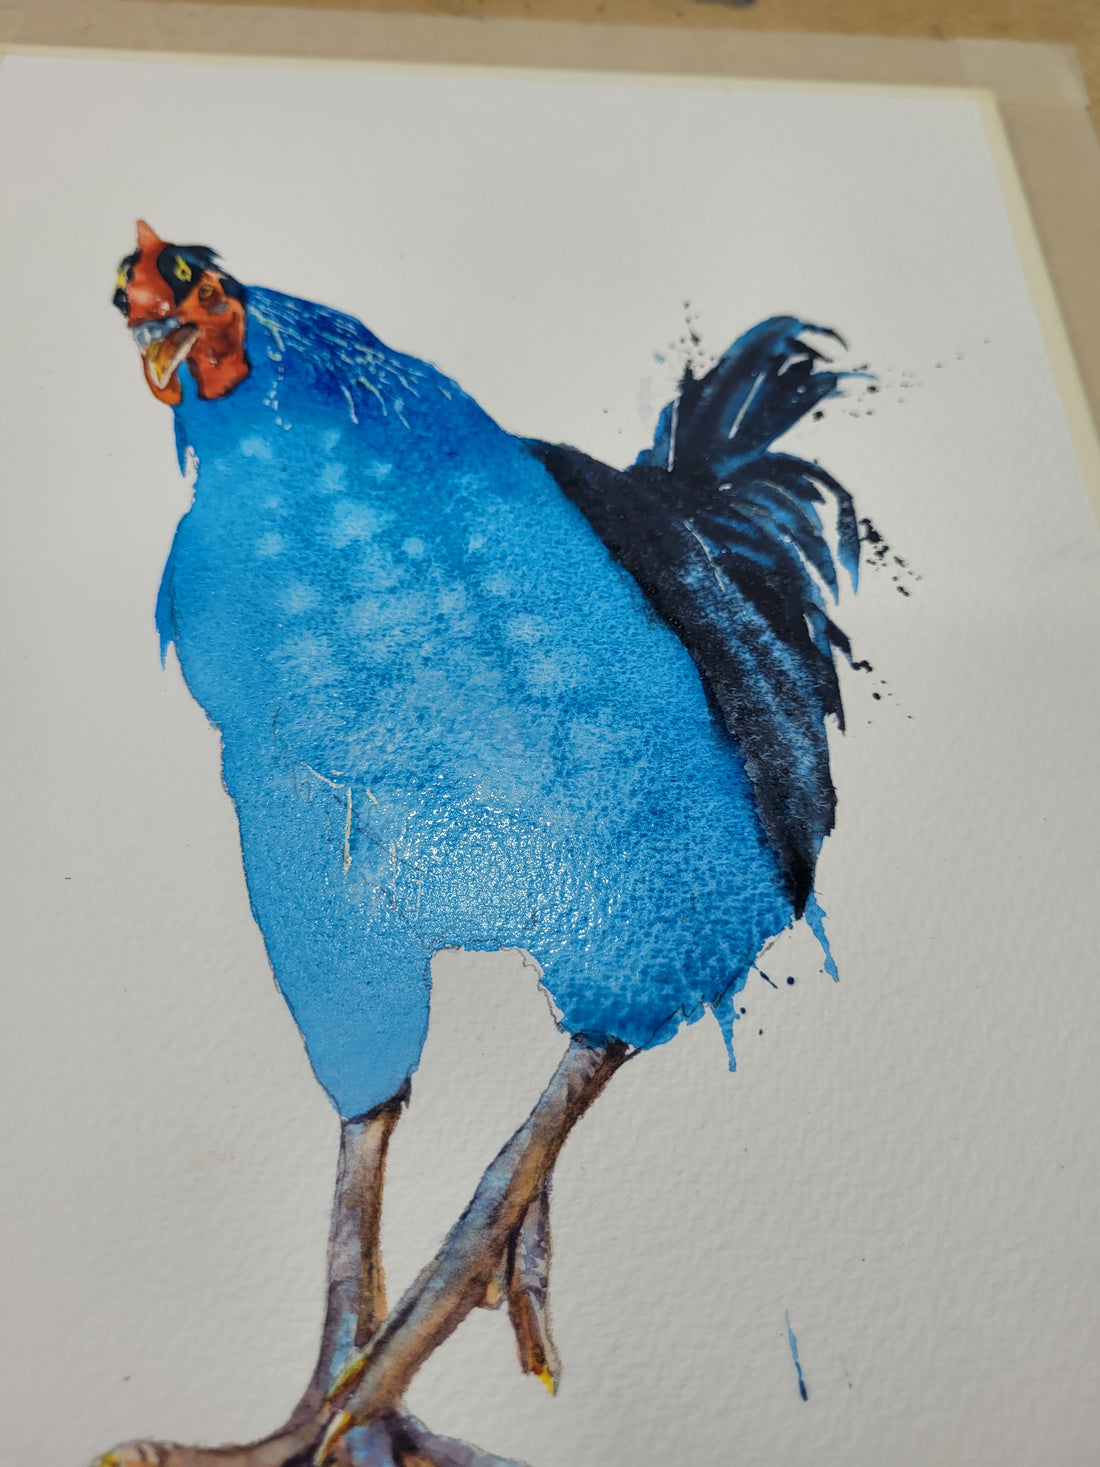 Painting a chicken ( you did what ?)